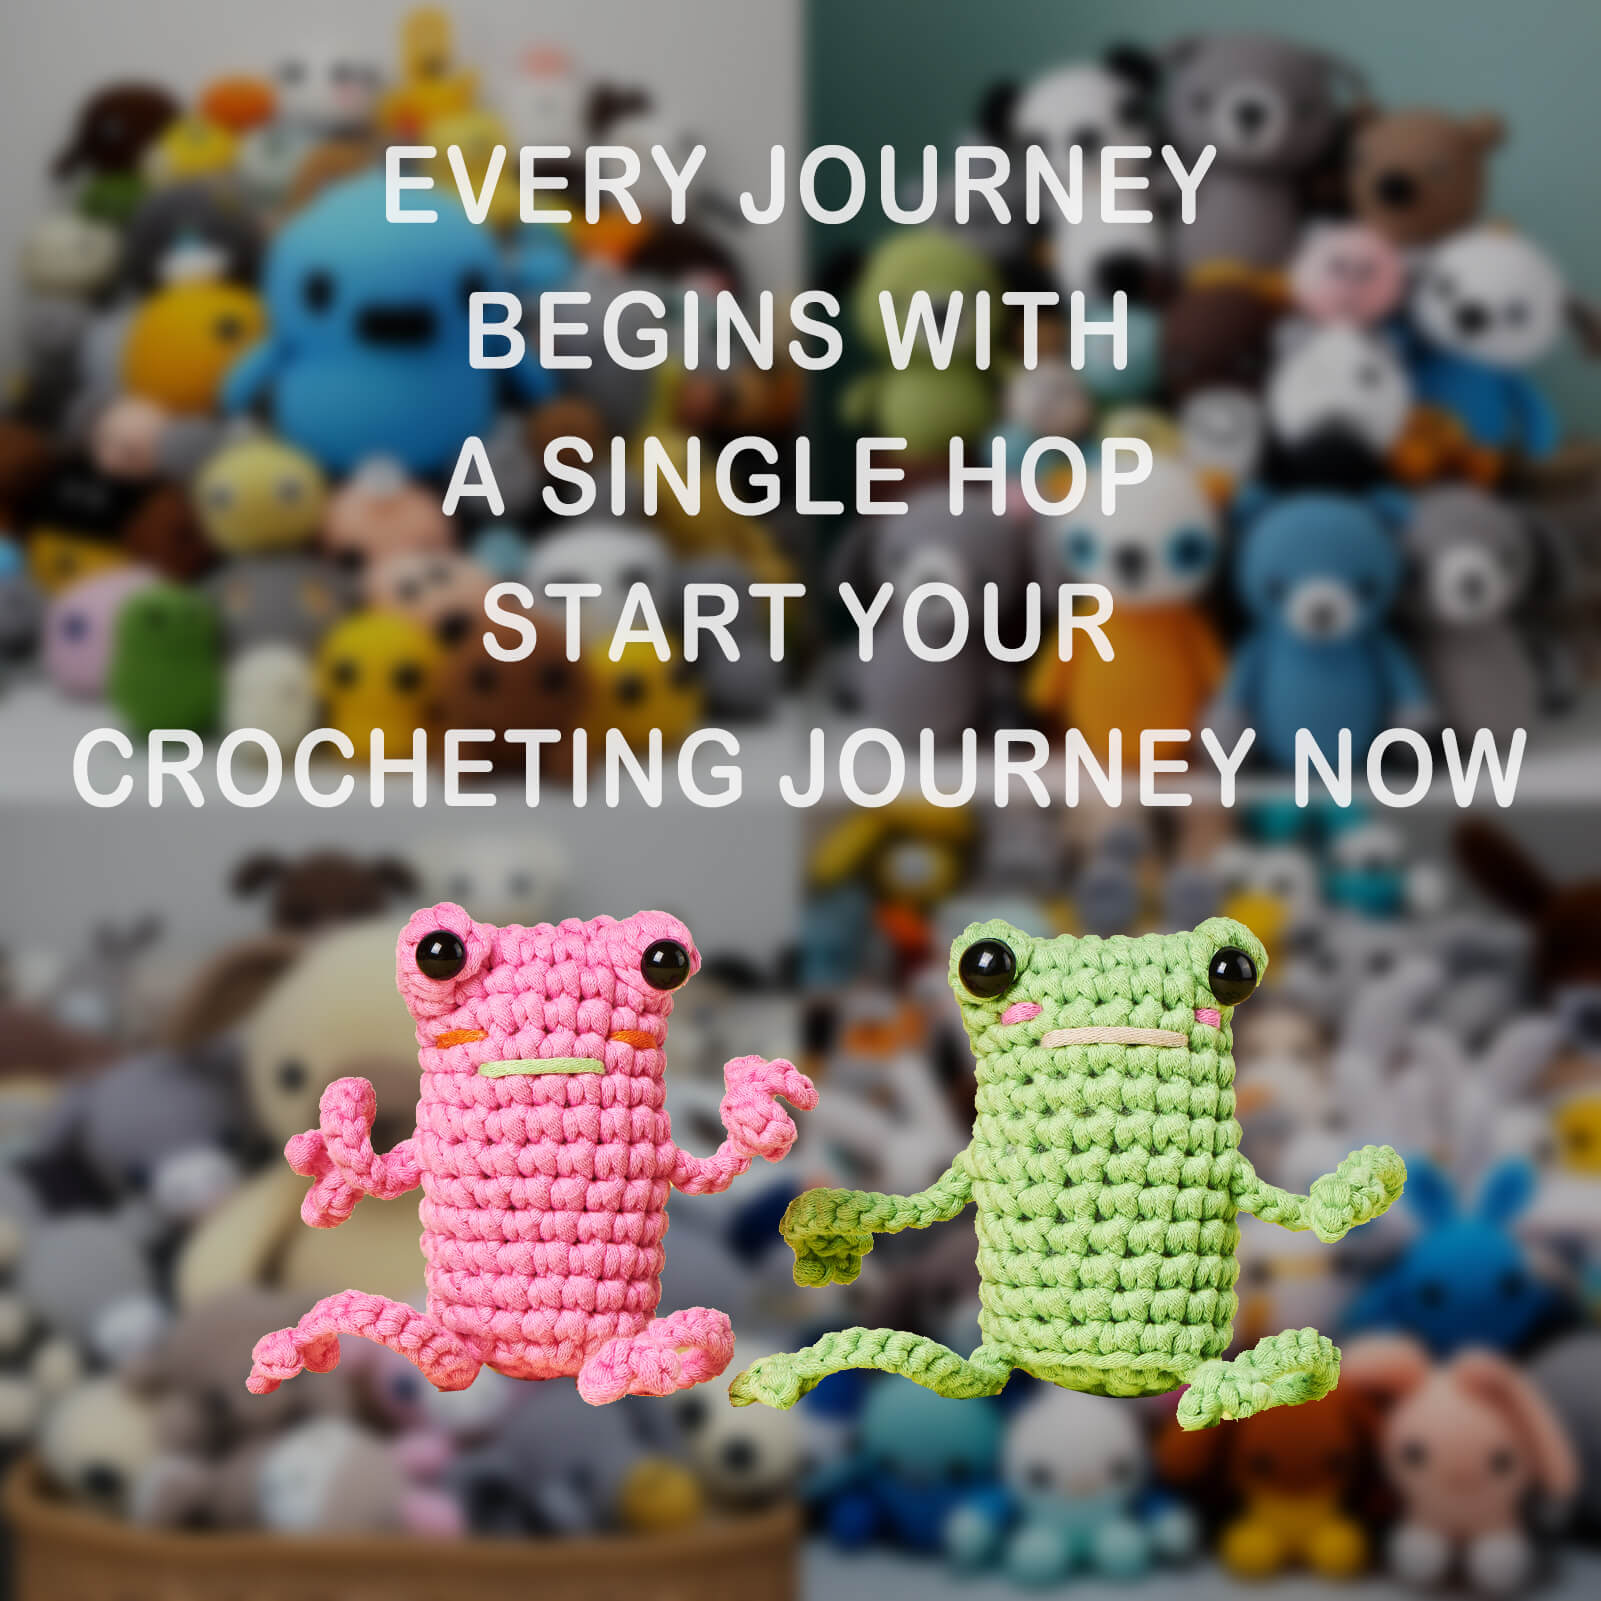 Crochet Kit for Kids Beginners and Adults, Learn to Crochet with Amigurumi  Crochet Kit for Beginners, Complete Christmas Crocheting Starter Kits with